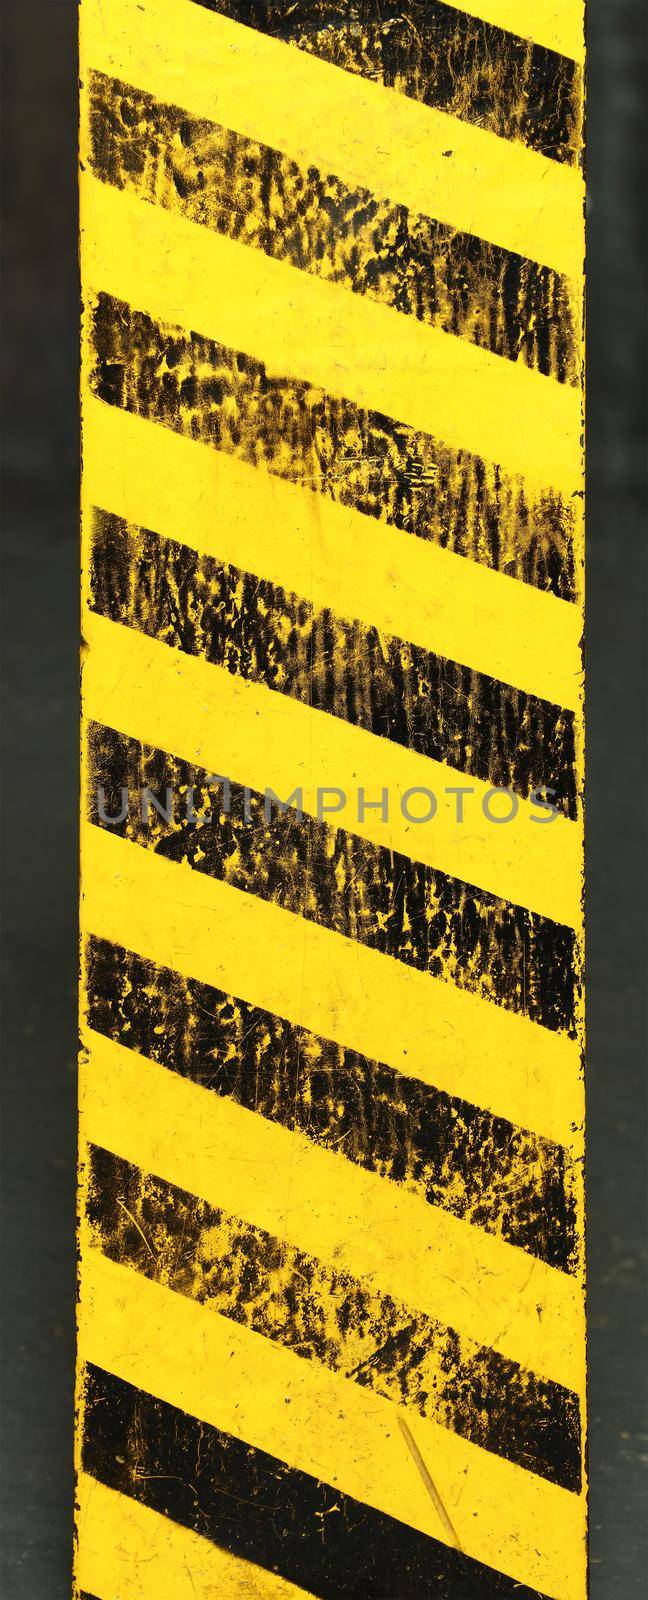 Old yellow weathered painted background with grunge black hazard sign stripes over dark